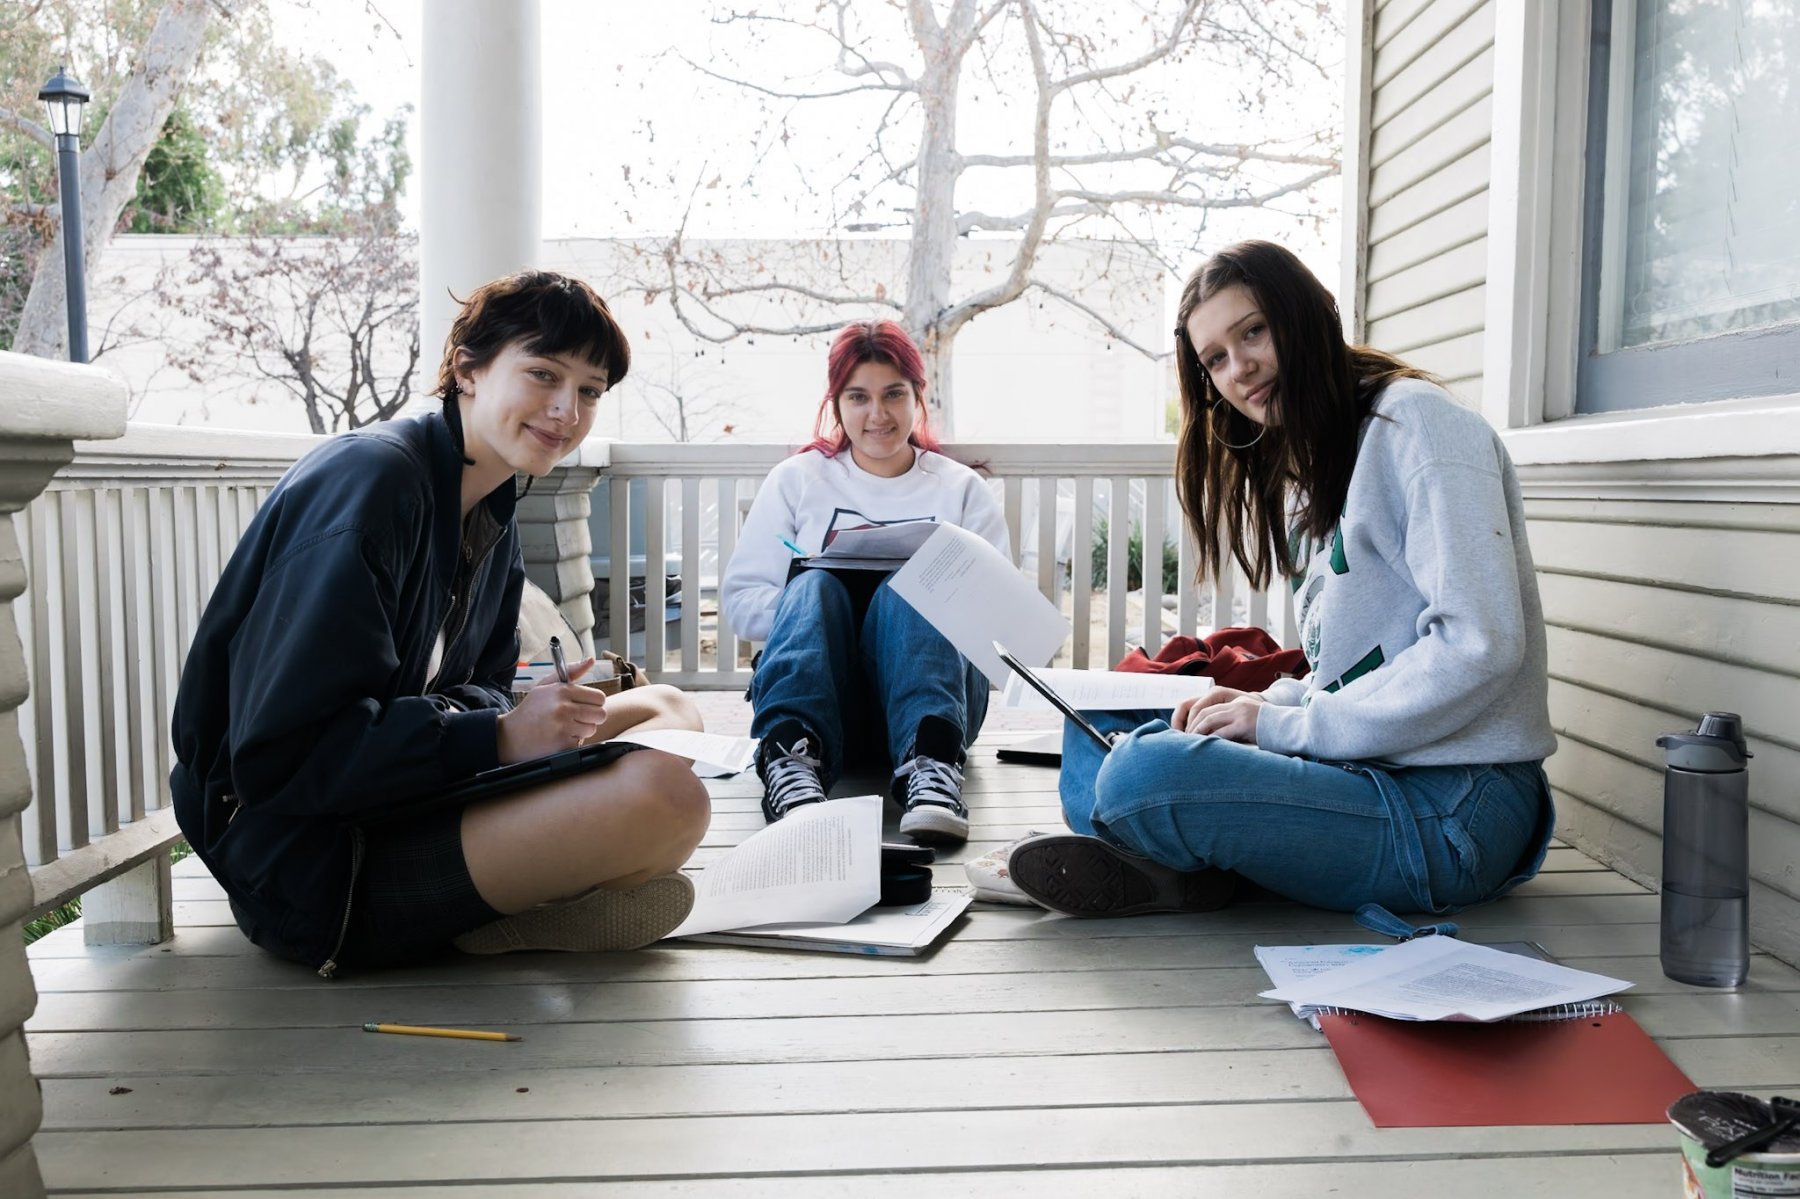 HS bungalow porch students studying smile